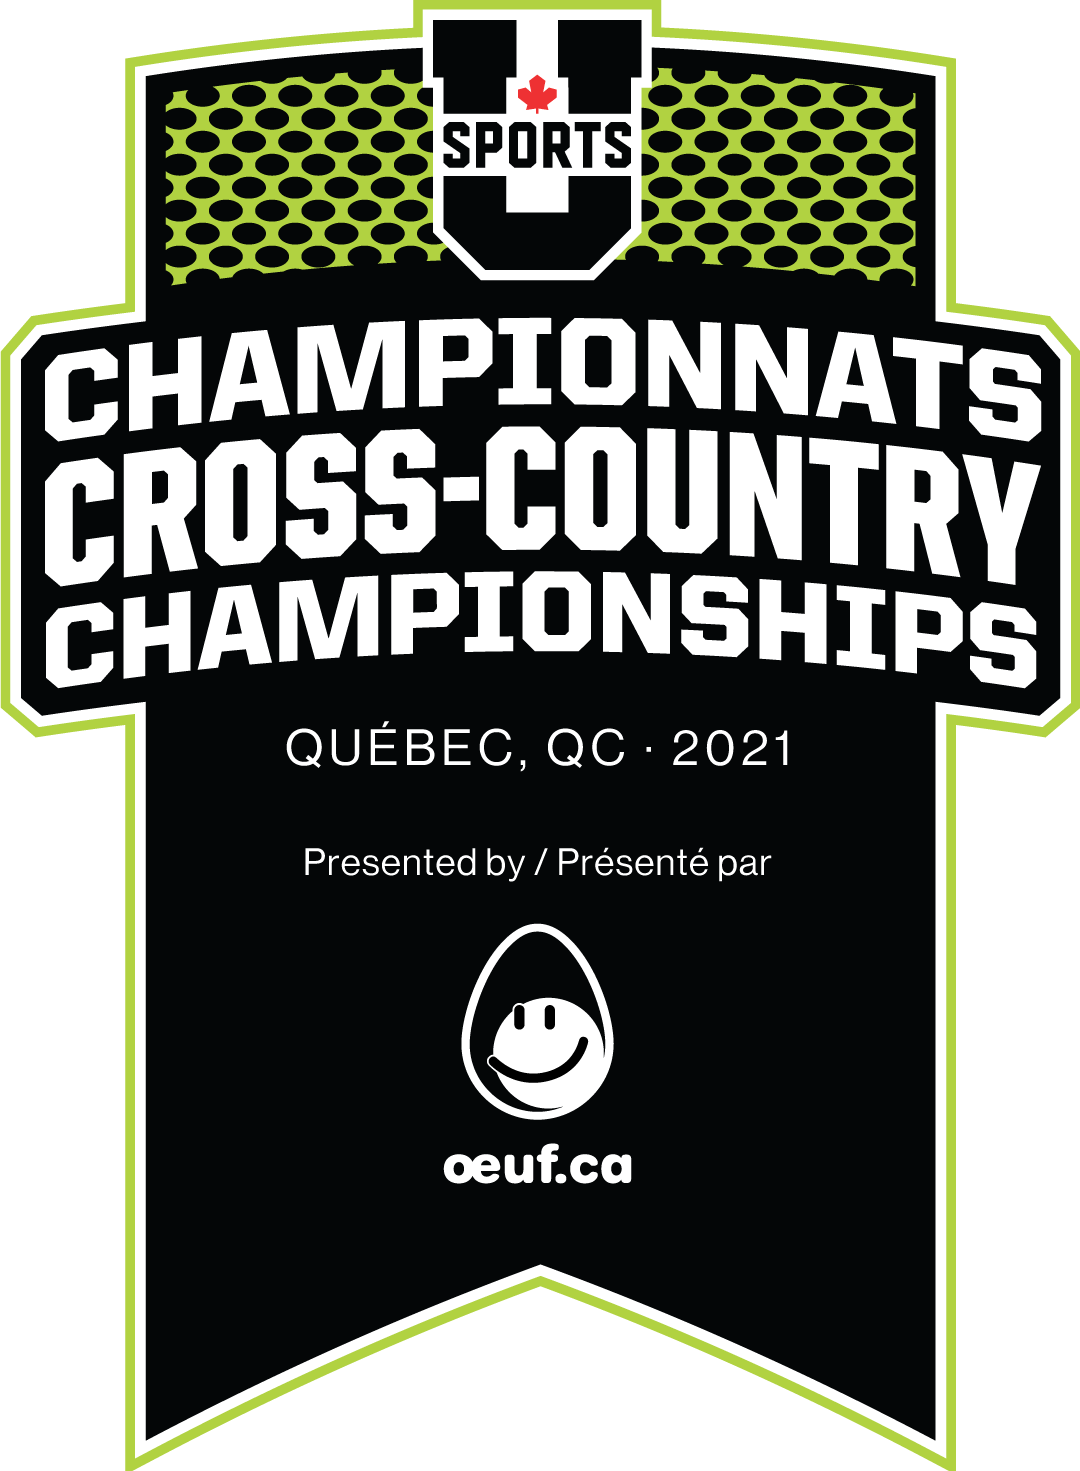 USports_Champ2122_crossCountry_Primary_BL_oeufCA.png (97 KB)